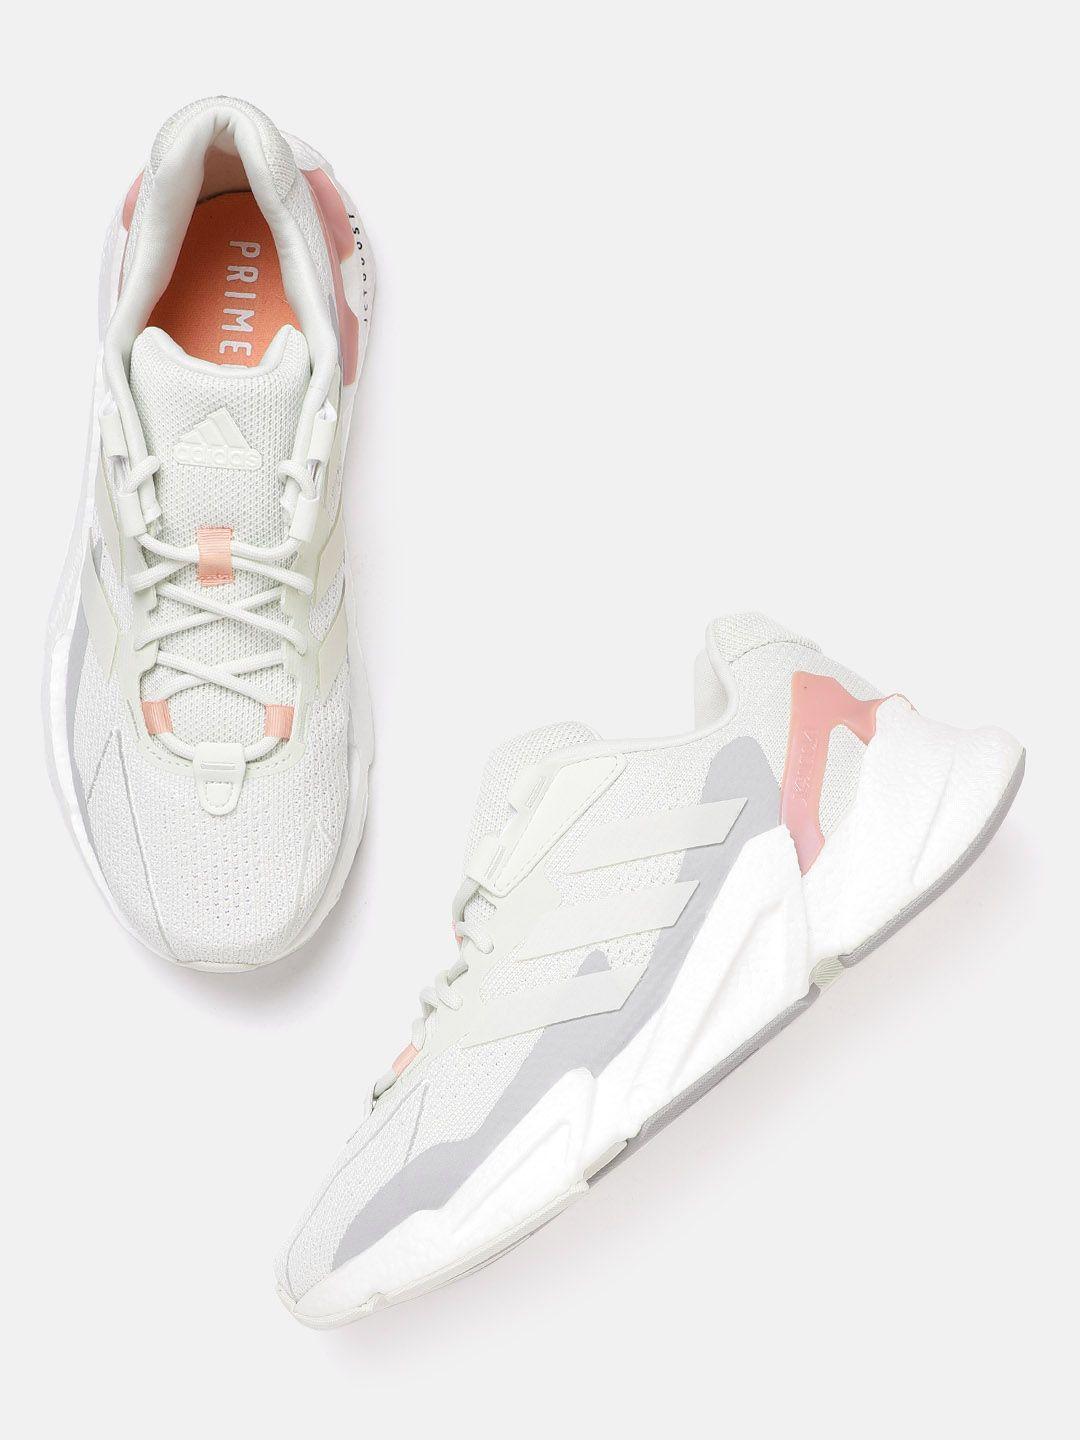 adidas-women-off-white-woven-design-x9000l4--sustainable-running-shoes